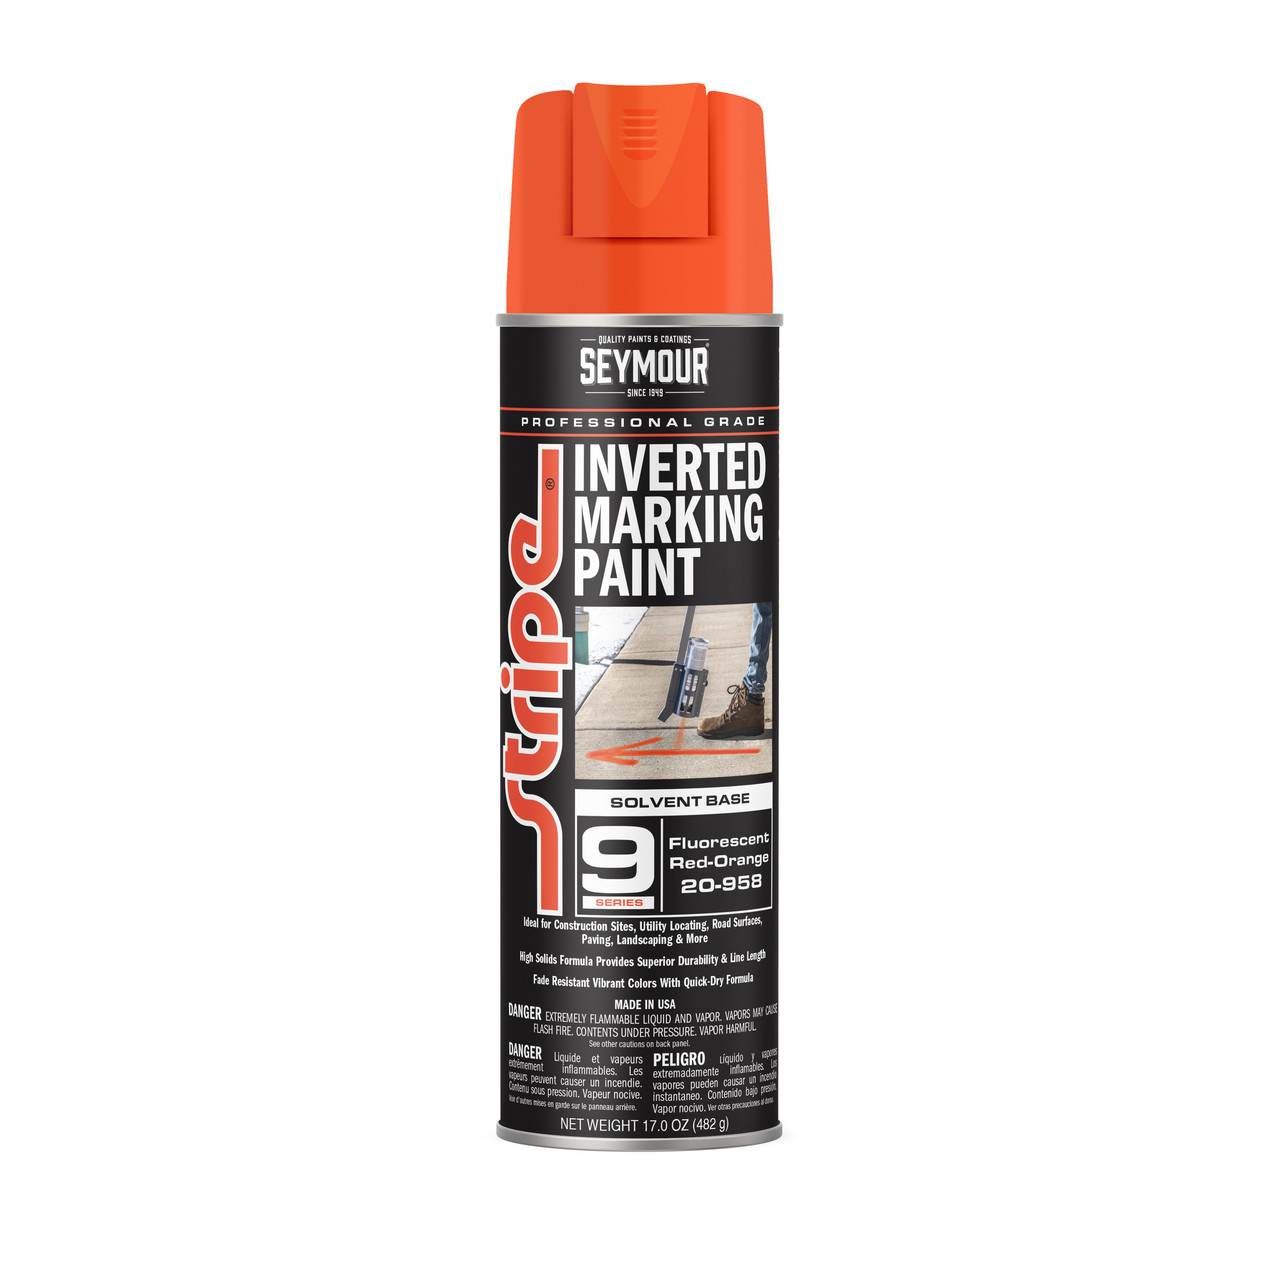 Seymour Stripe® 20-958 Red/Orange Fluorescent Solvent Base Street & Utility Marking Paint 17 oz. - 12 CANS